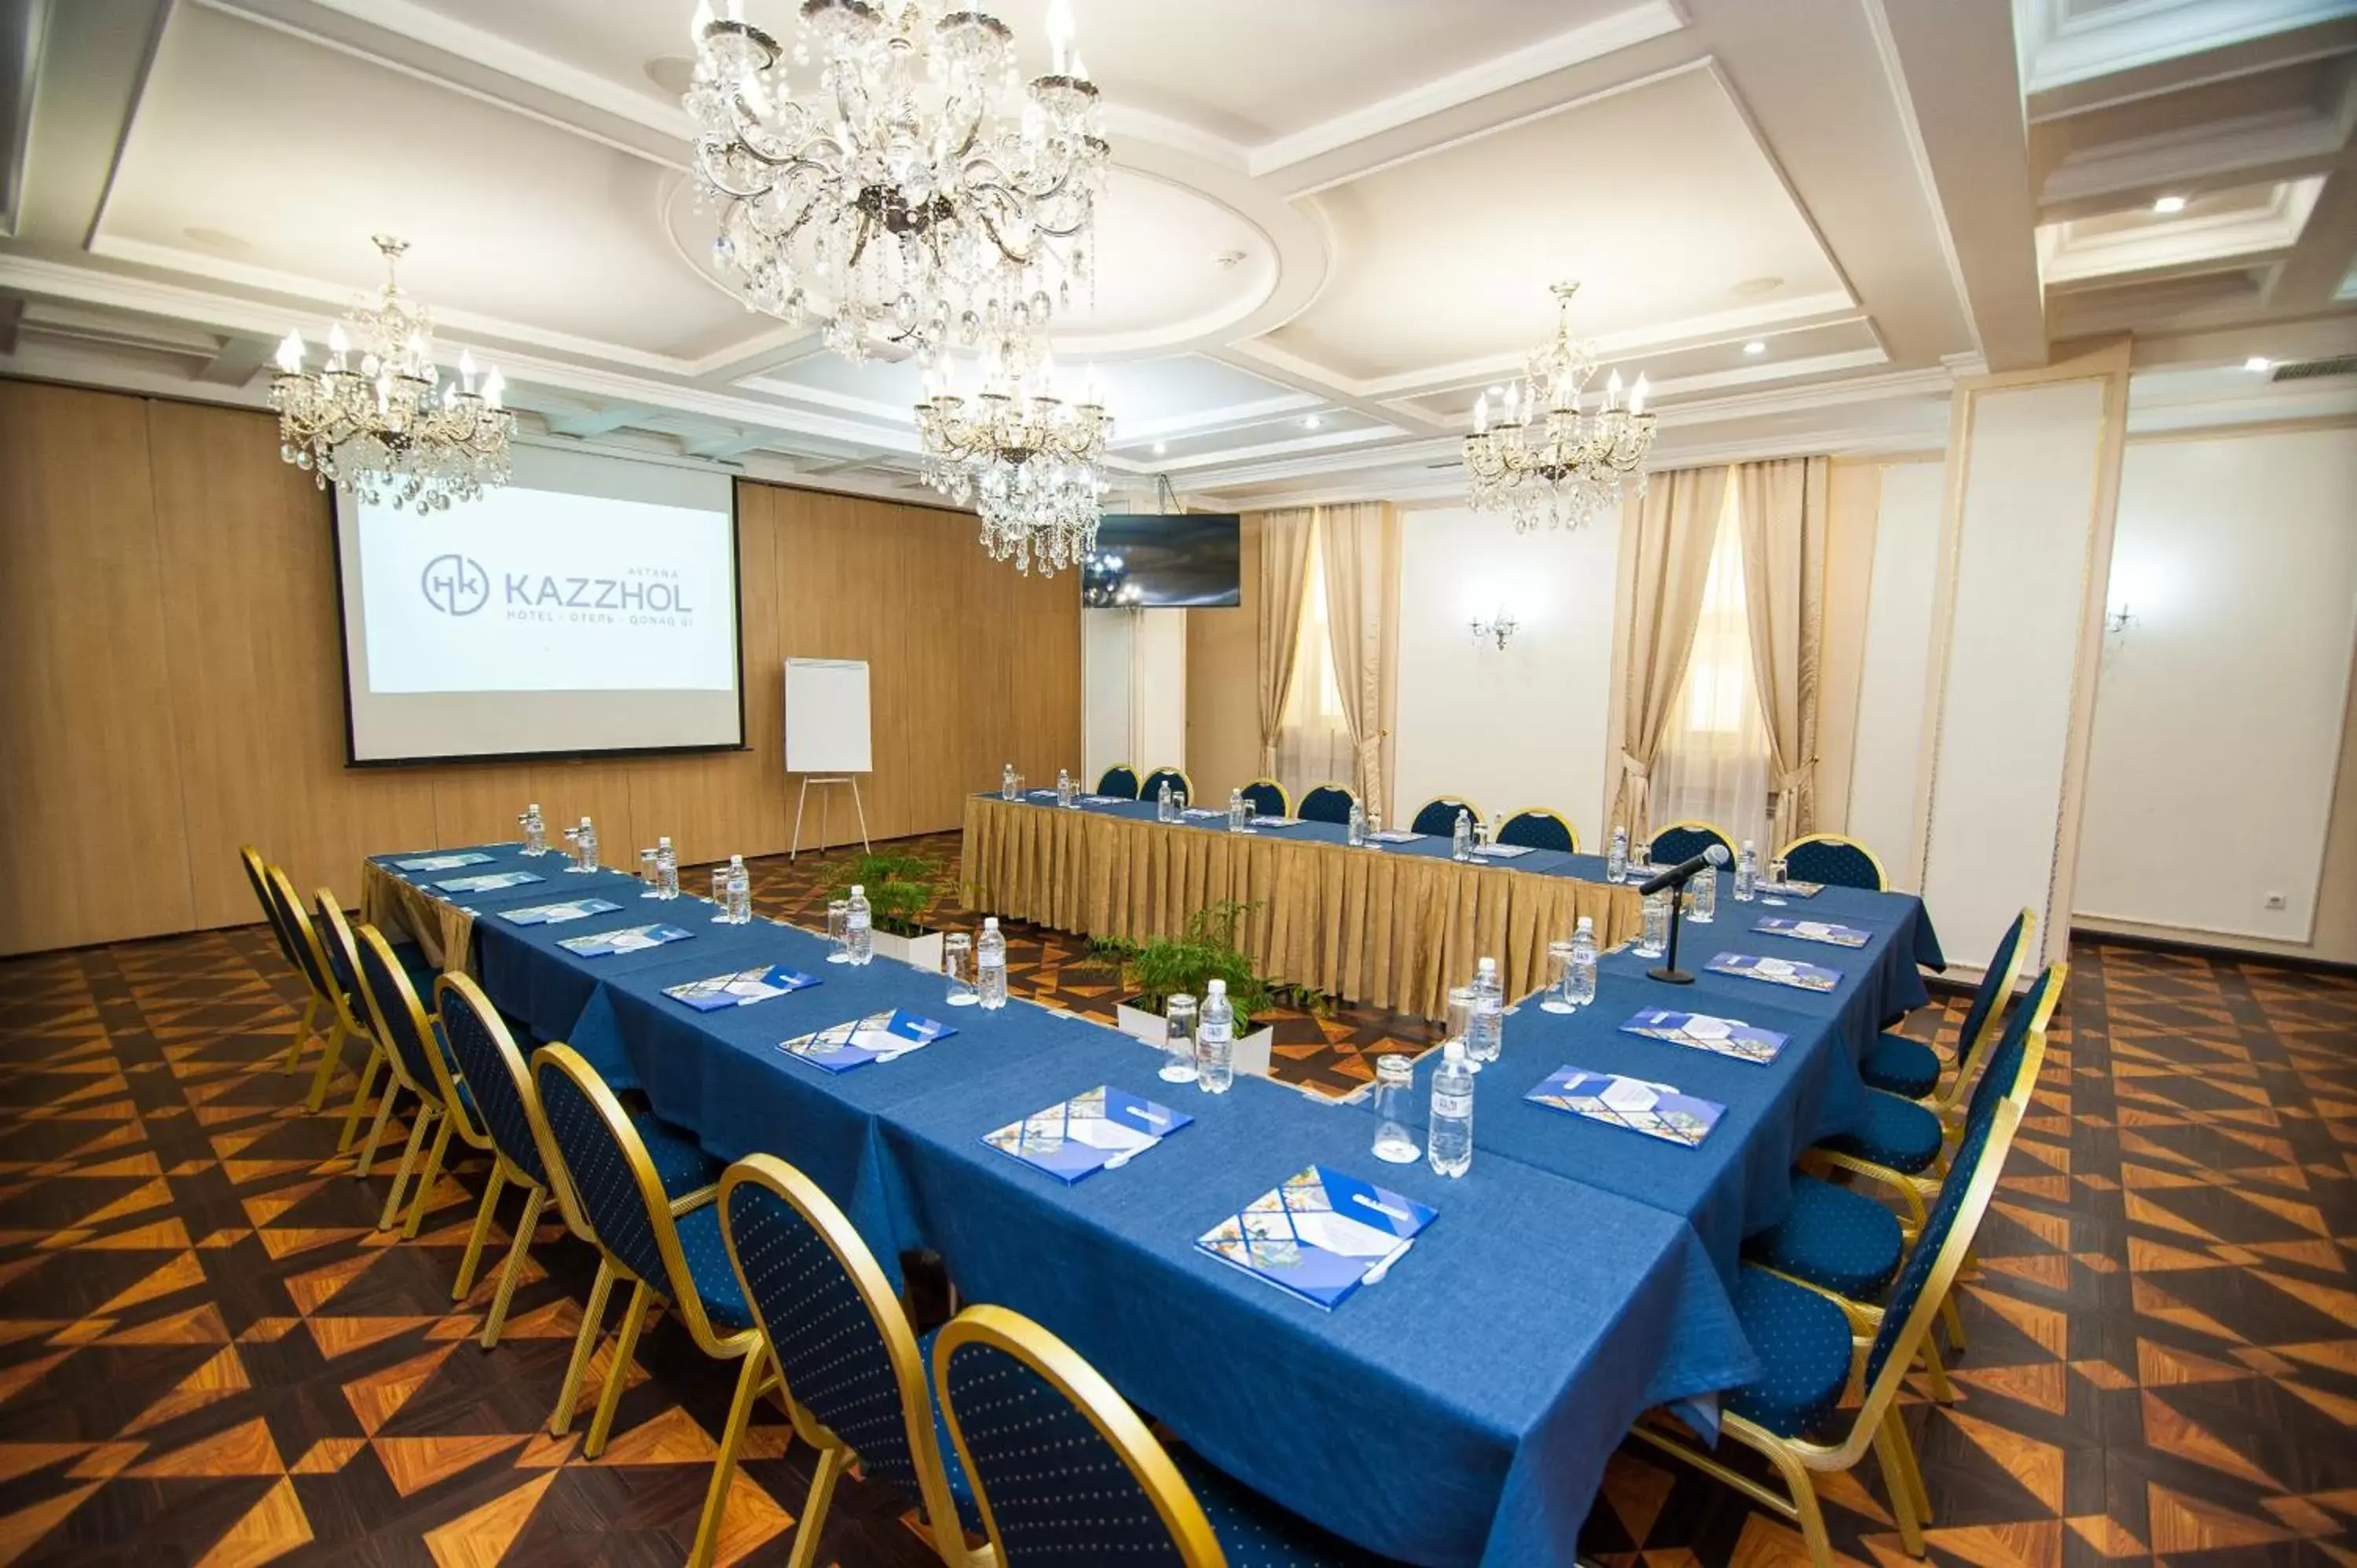 Meeting/conference room in Kazzhol Hotel Astana